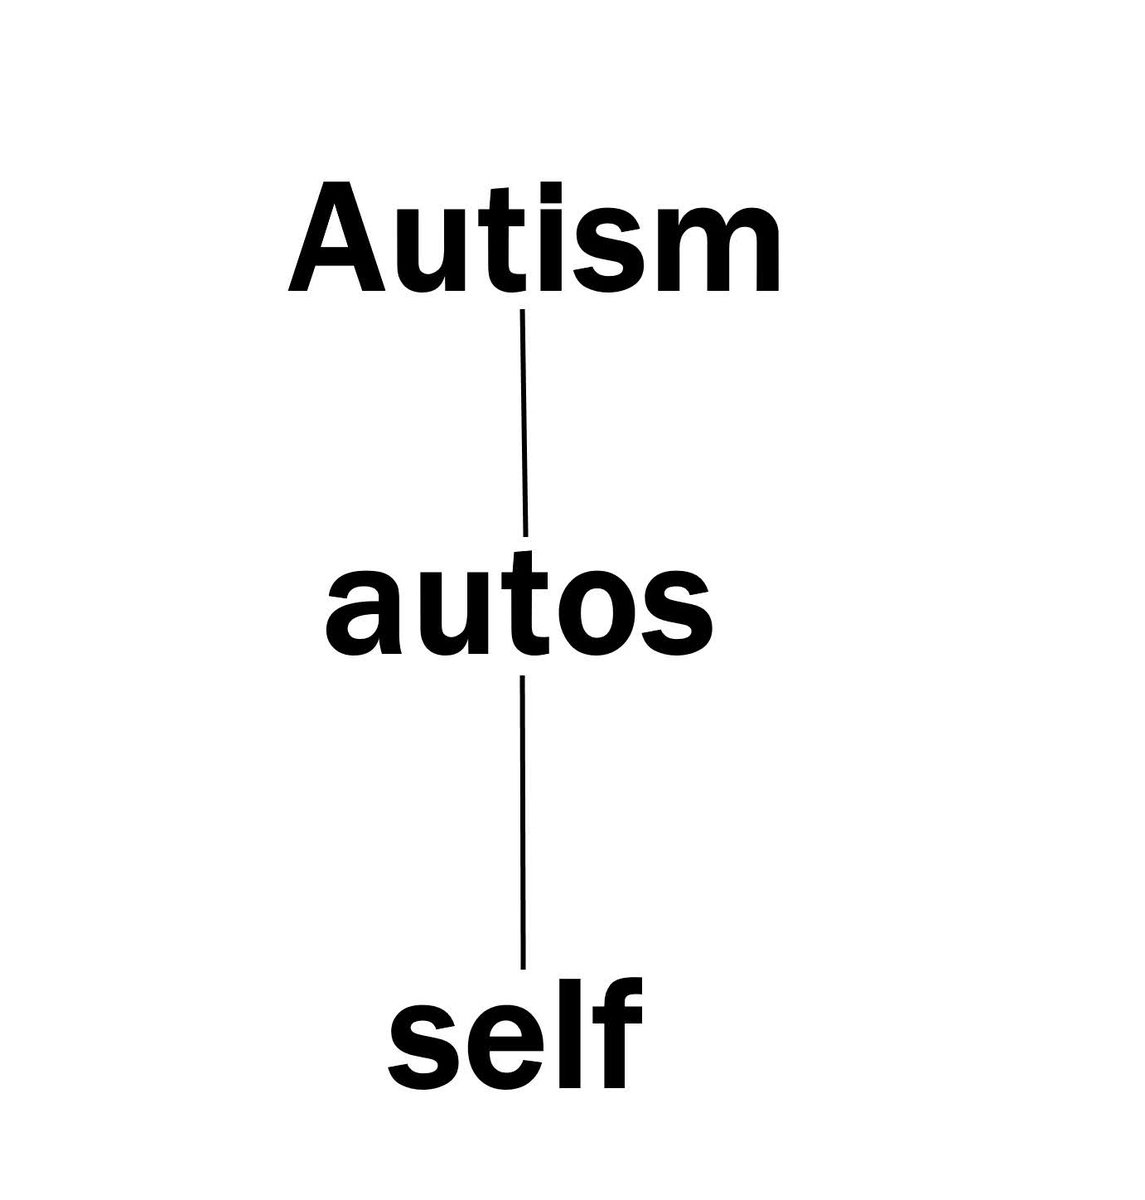 So first off I thought I'd start out with a few facts, before getting into my own experiences & symptoms:1) The word "autism" comes from the Greek word "autos," which means "self."2/17